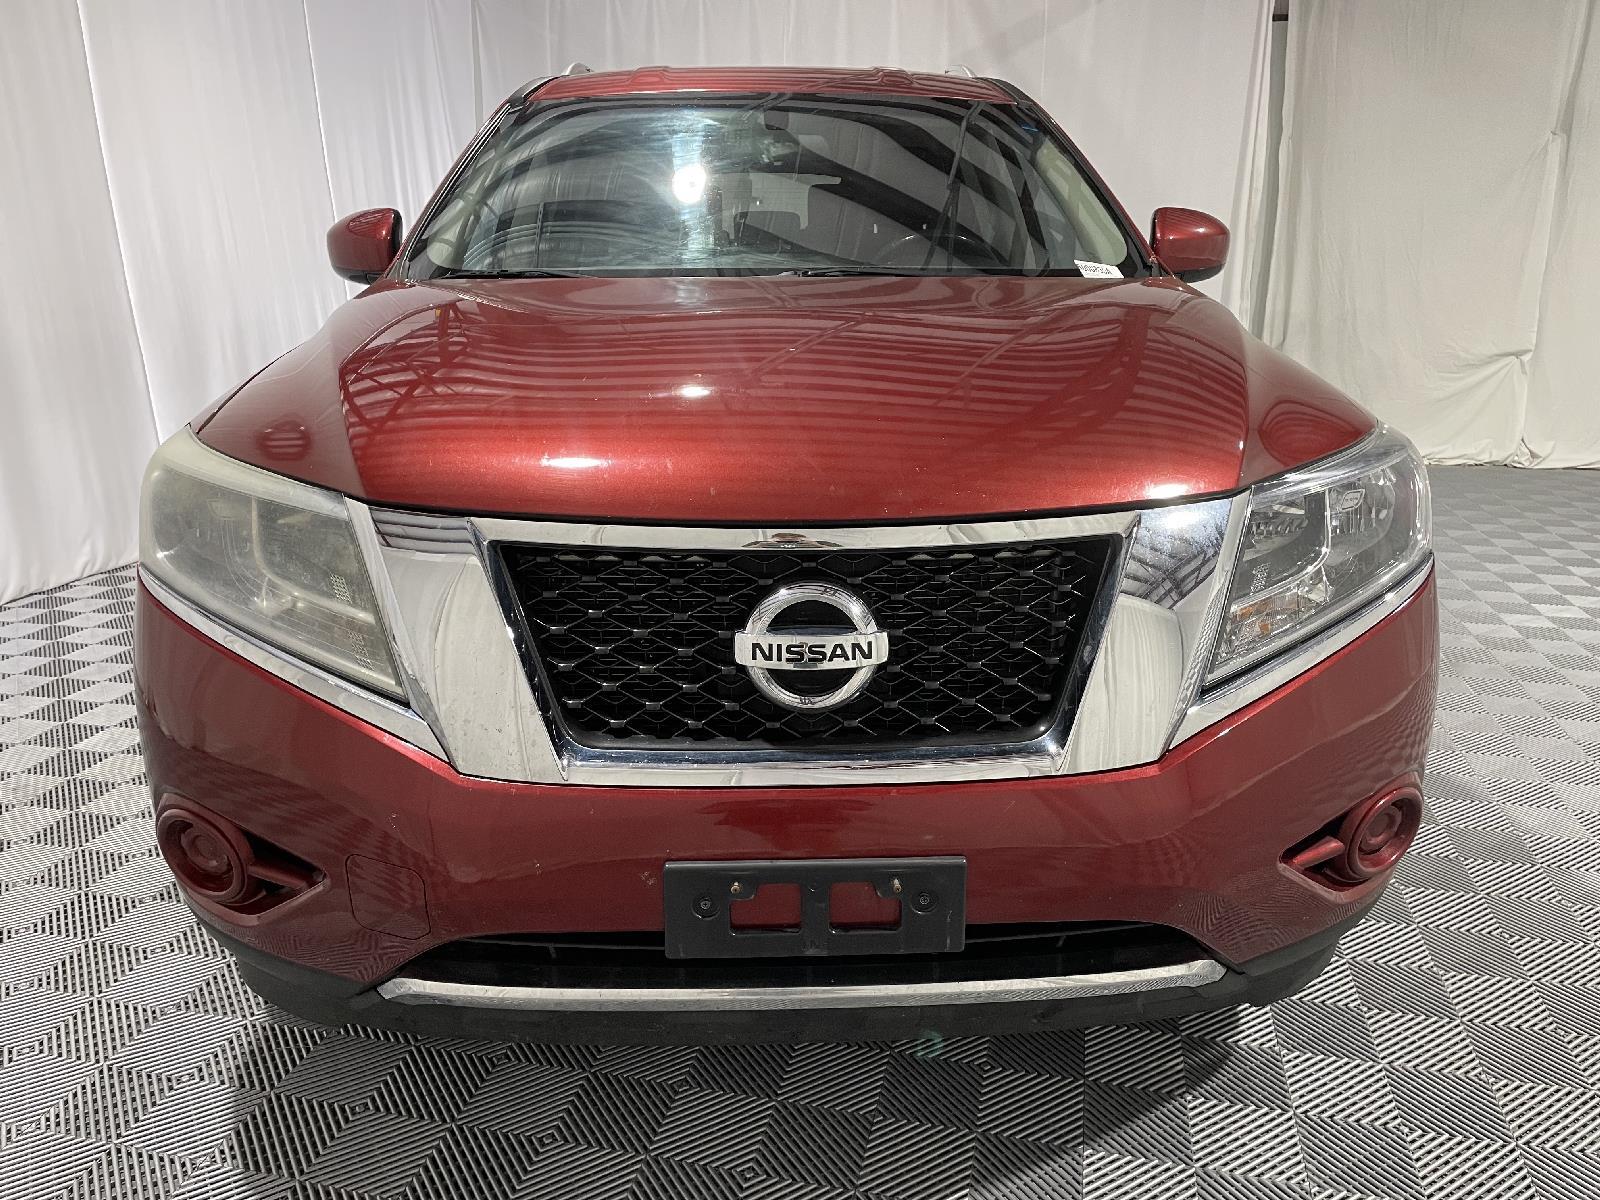 Used 2013 Nissan Pathfinder SV SUV for sale in St Joseph MO